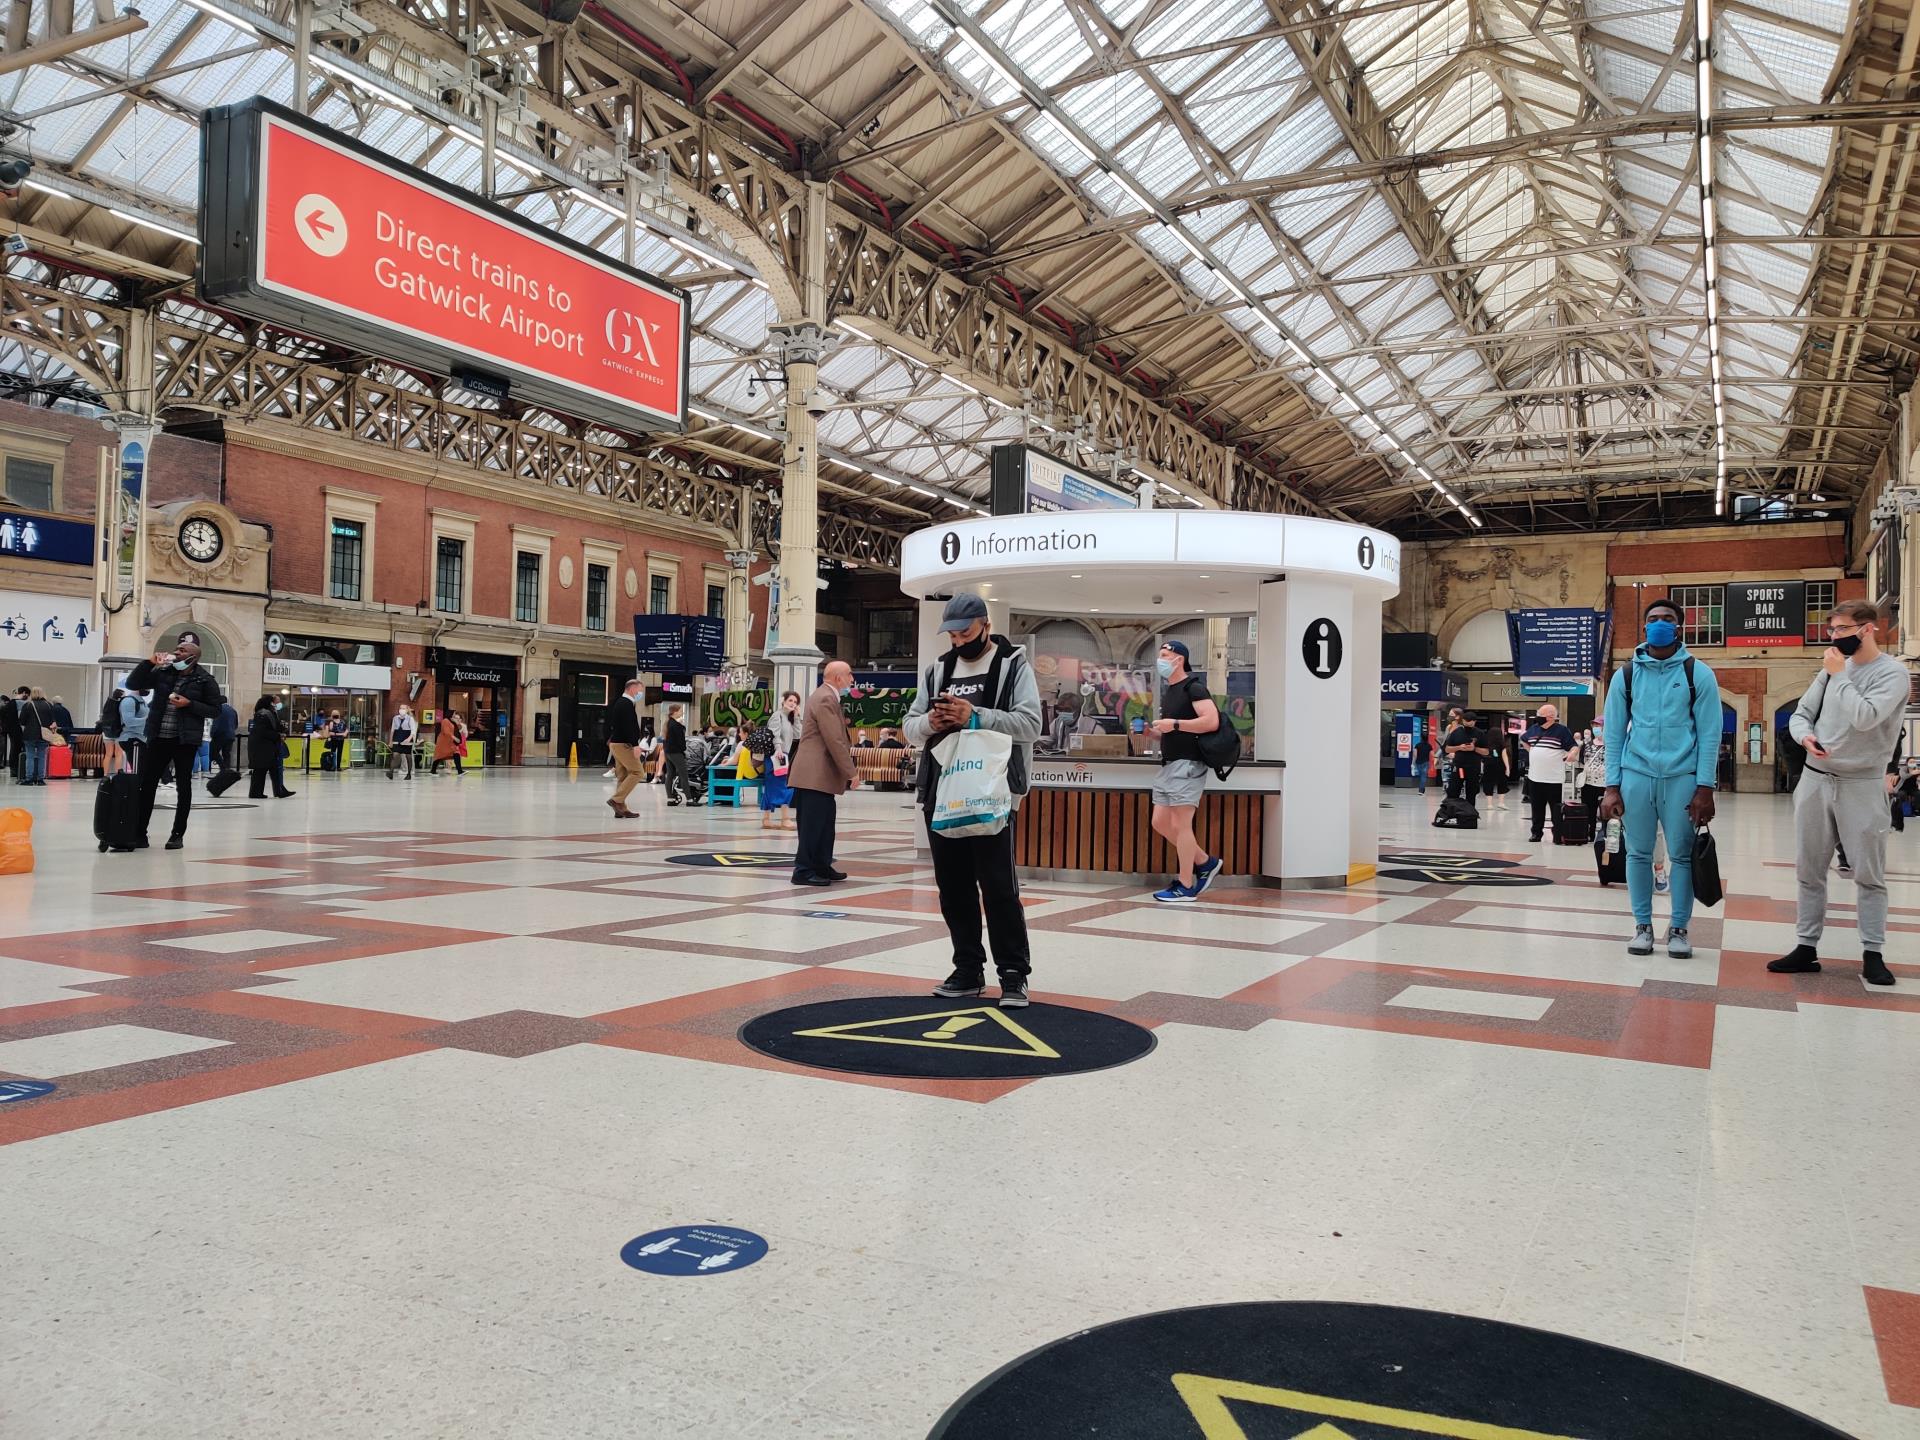 The concourse at Victoria National Rail station